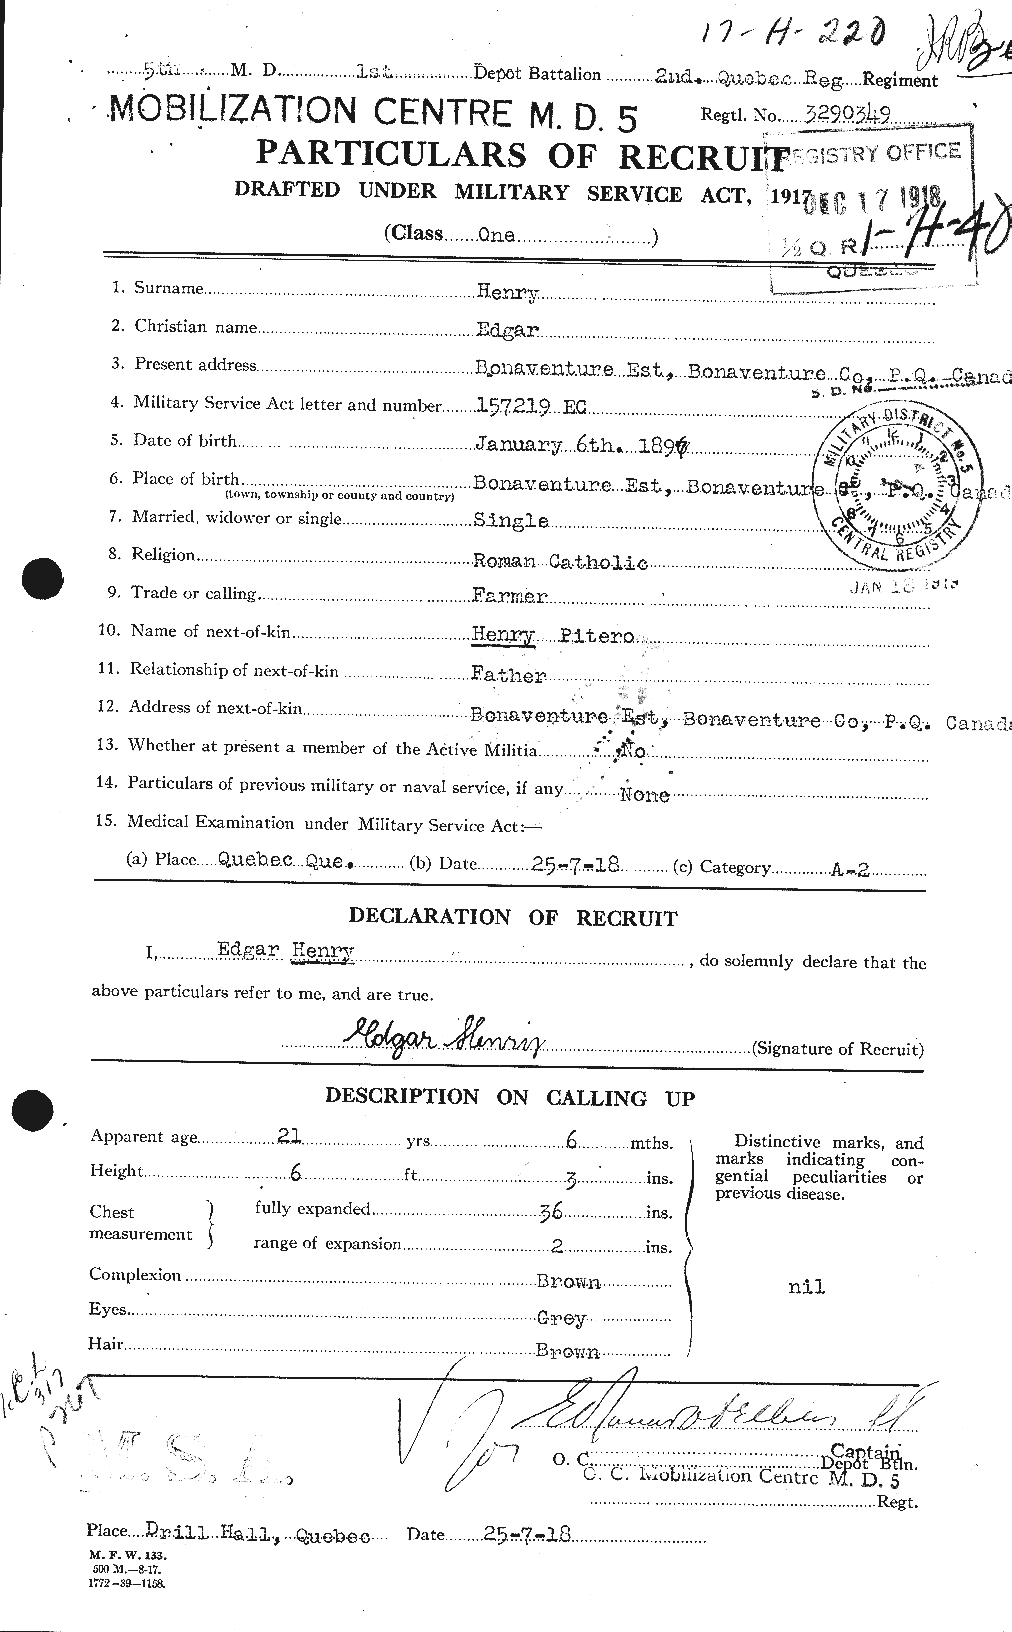 Personnel Records of the First World War - CEF 392829a